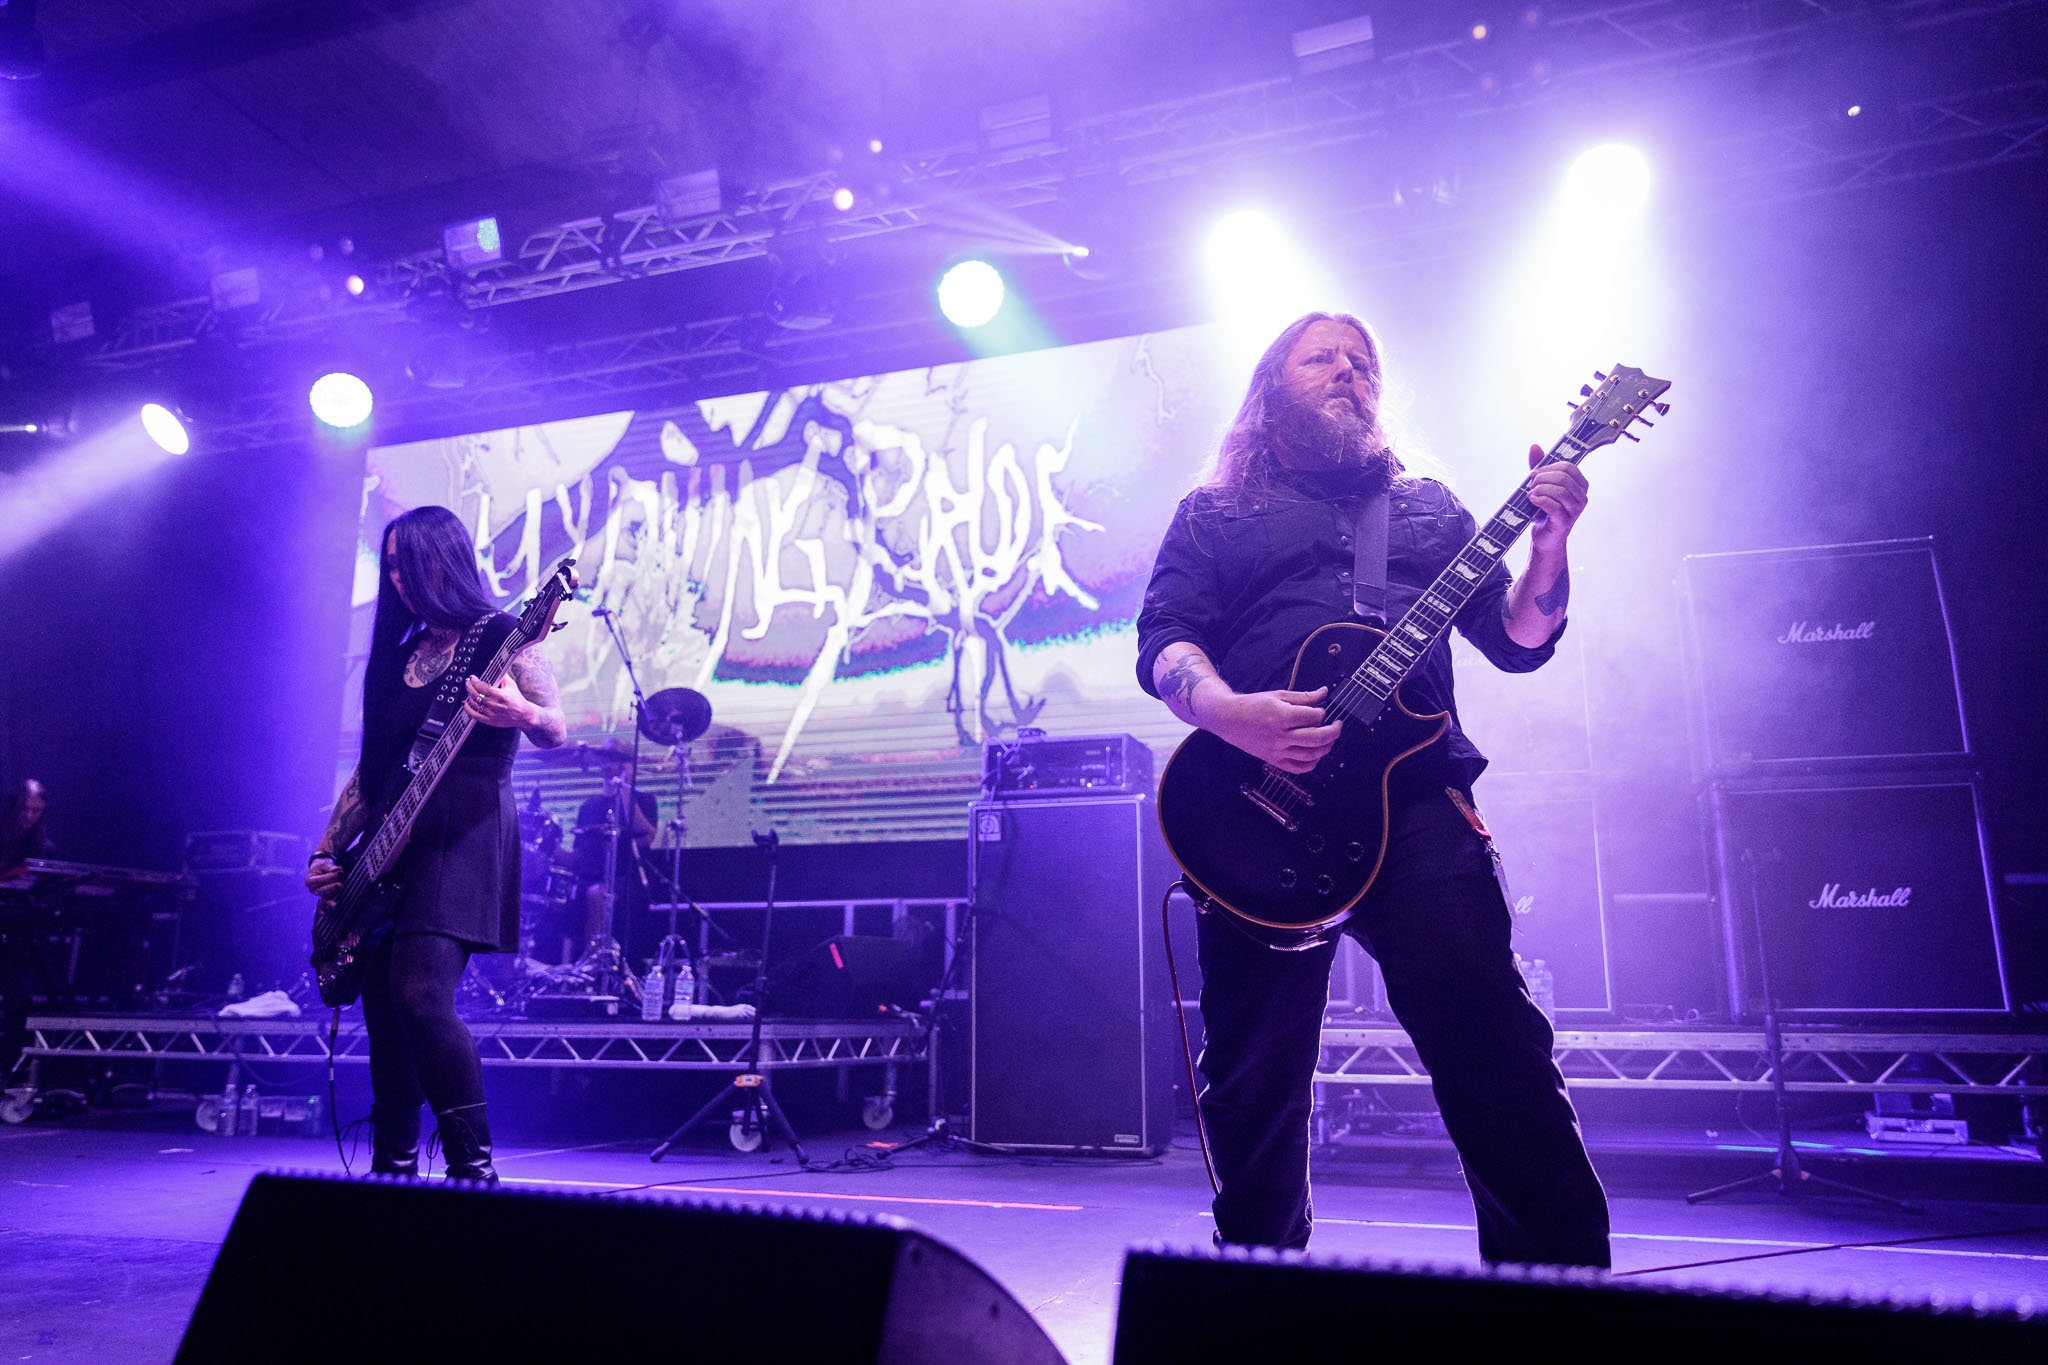 My Dying Bride at the Damnation Festival in Manchester on Novemb